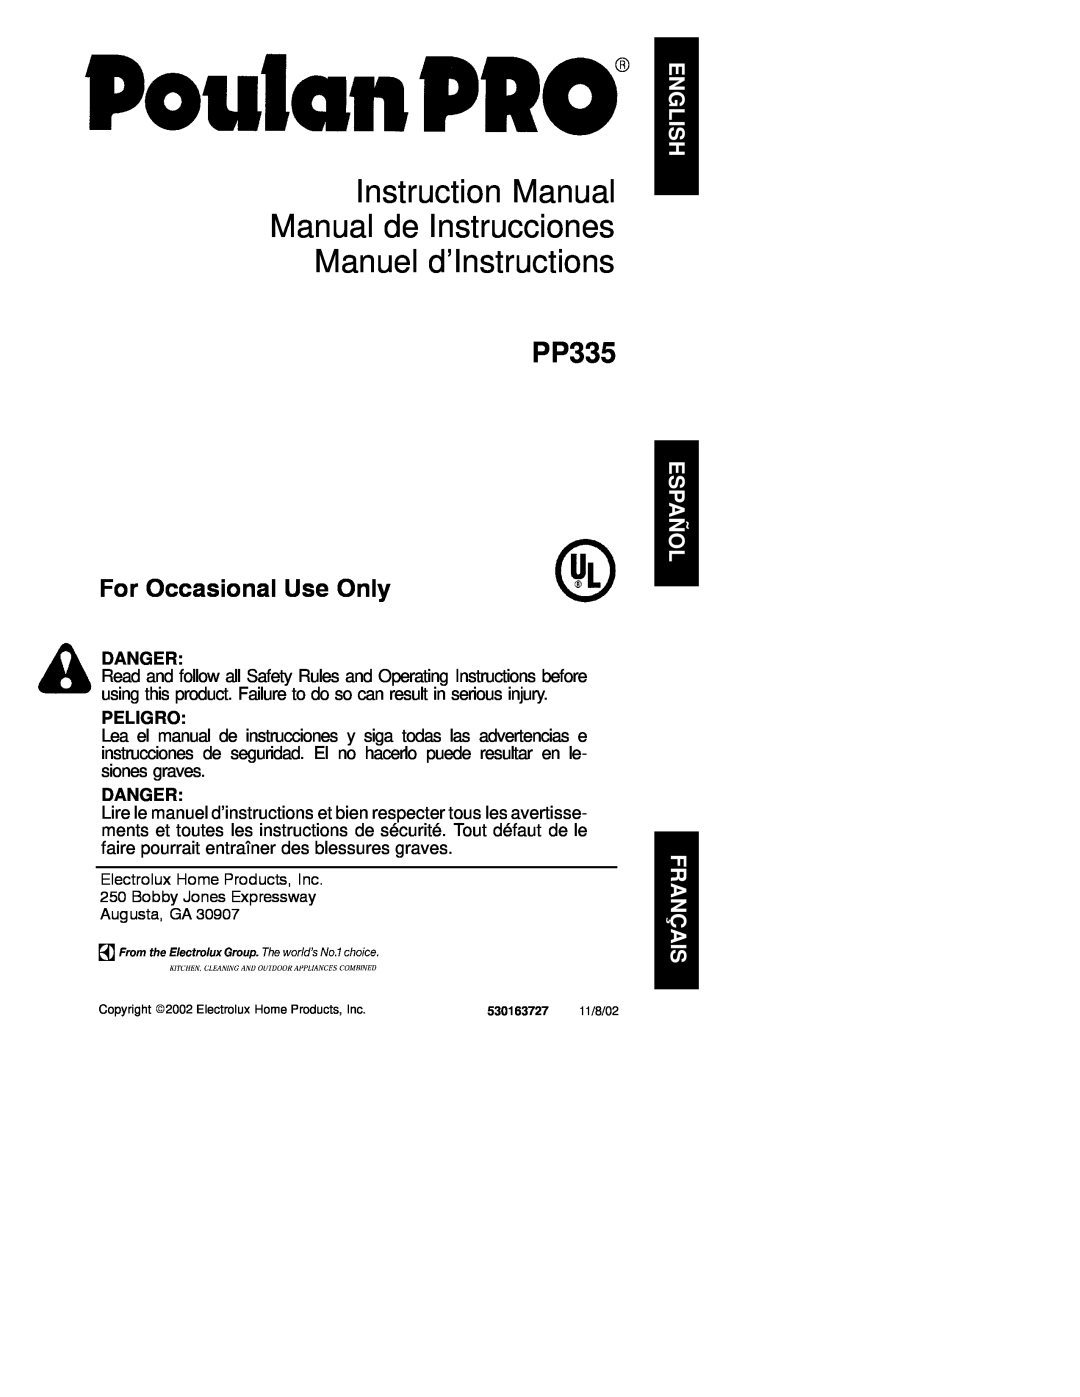 Poulan PP335, 530163727 instruction manual Manuel d’Instructions, For Occasional Use Only, Danger, Peligro 